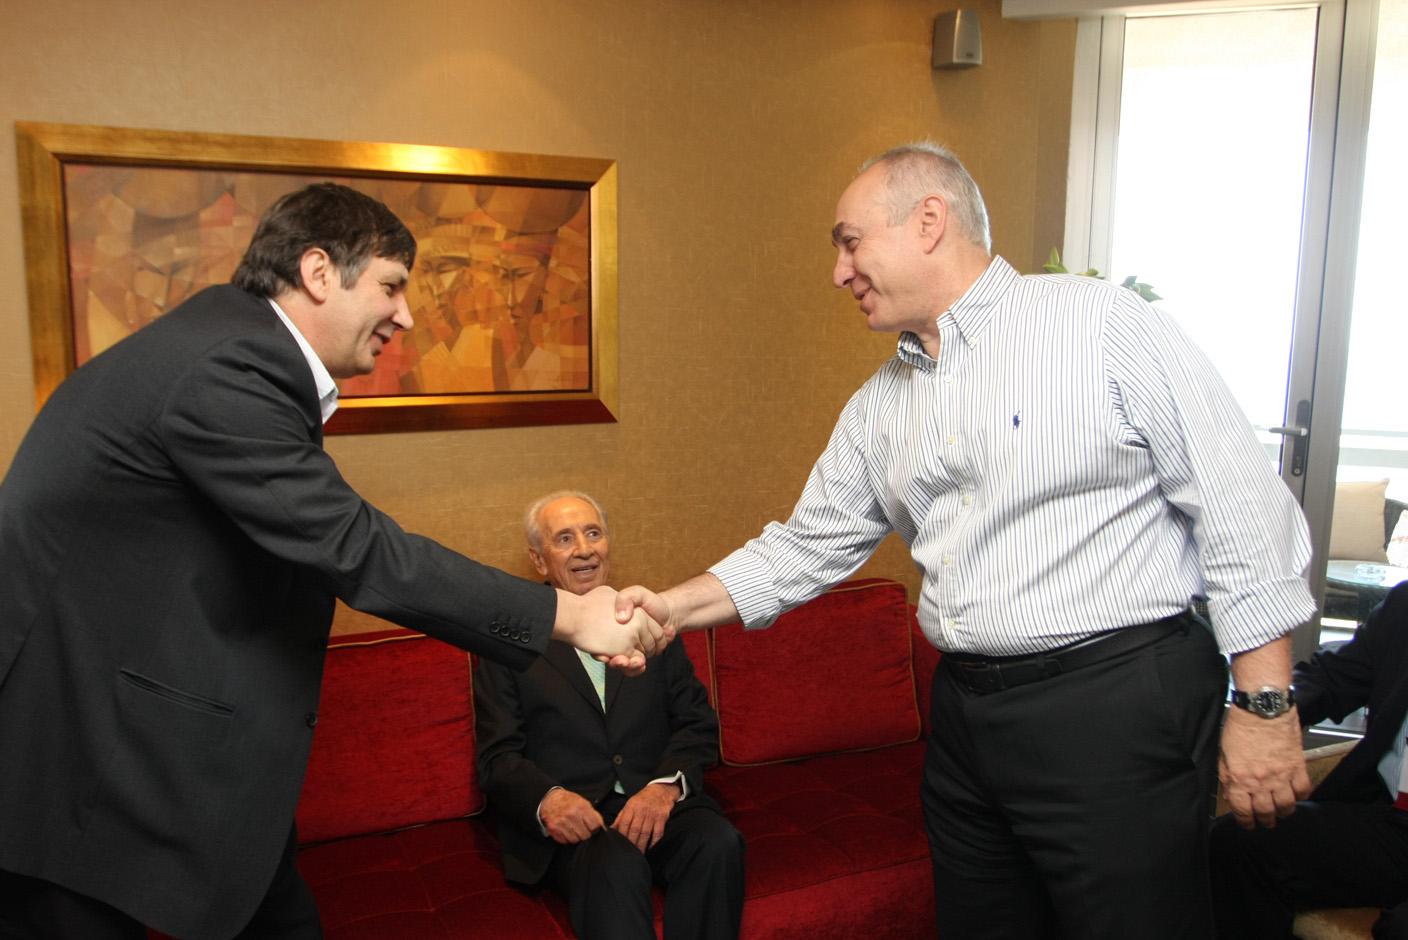 Hami Peres shakes the hands of Nobel laureate Andre Geim, and in the background - President Shimon Peres. Photography: Ilan Levy